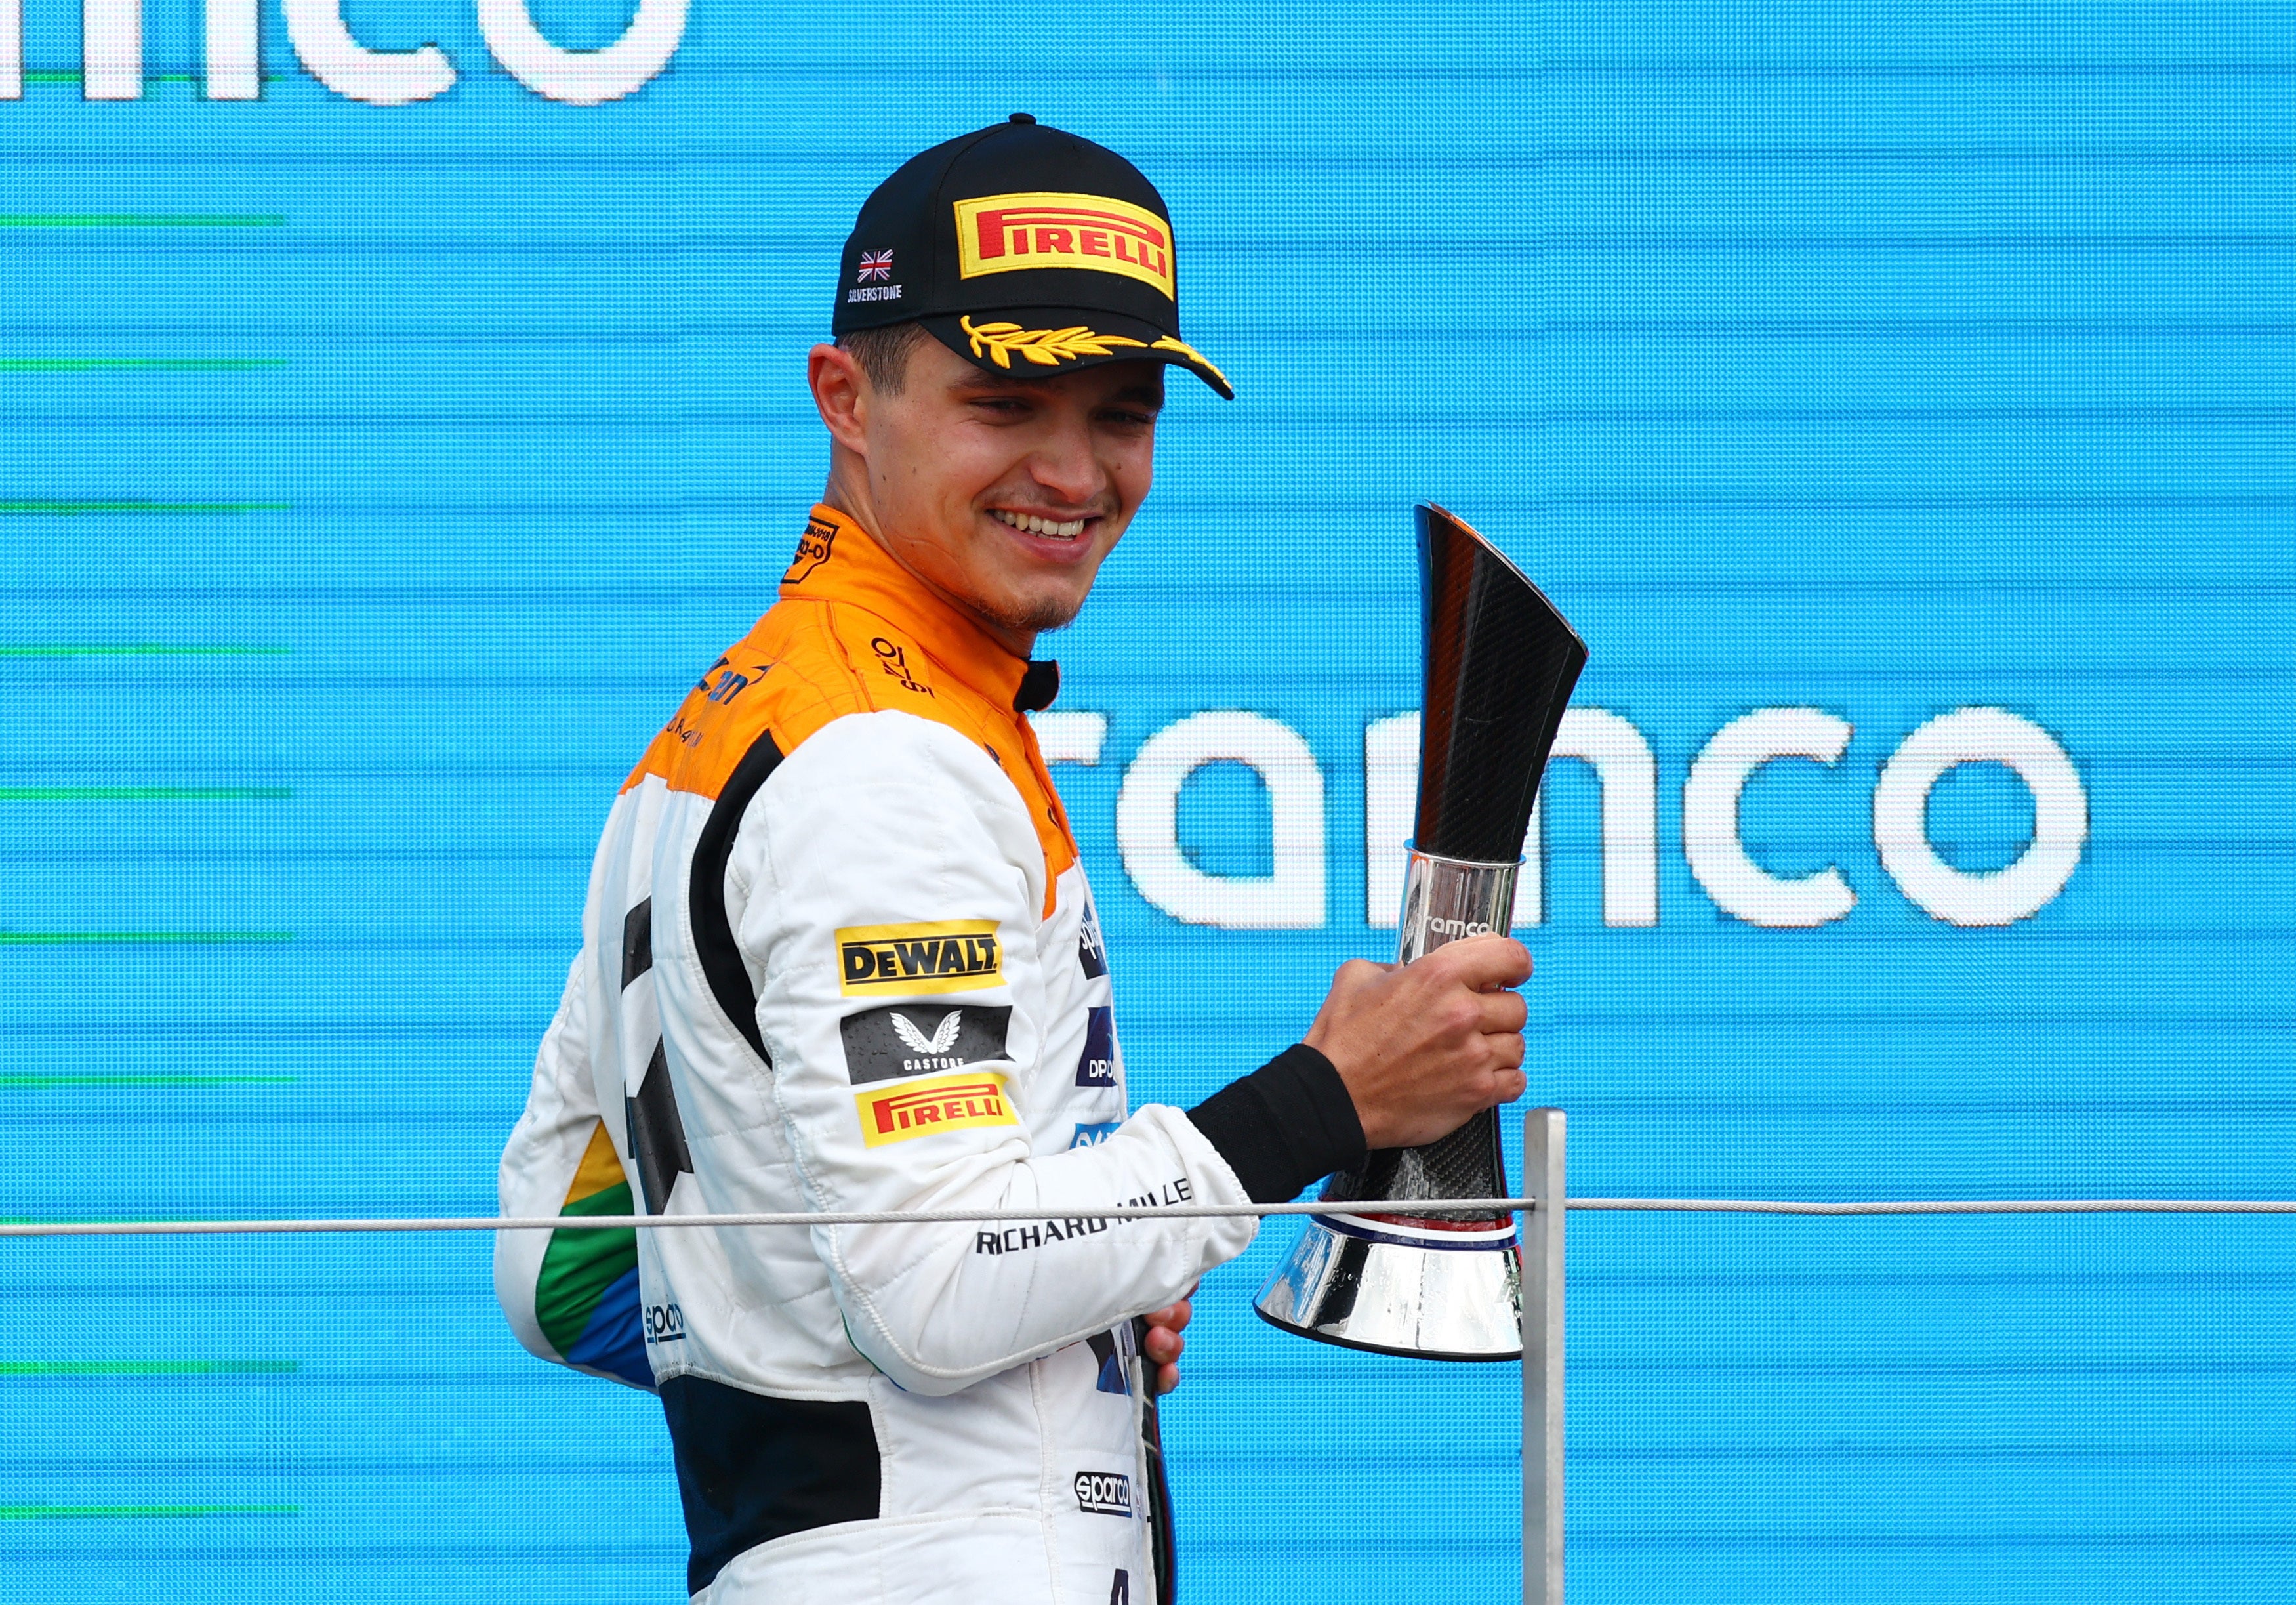 After a second place finish at Silverstone speculation is increasing over Lando Norris’ future